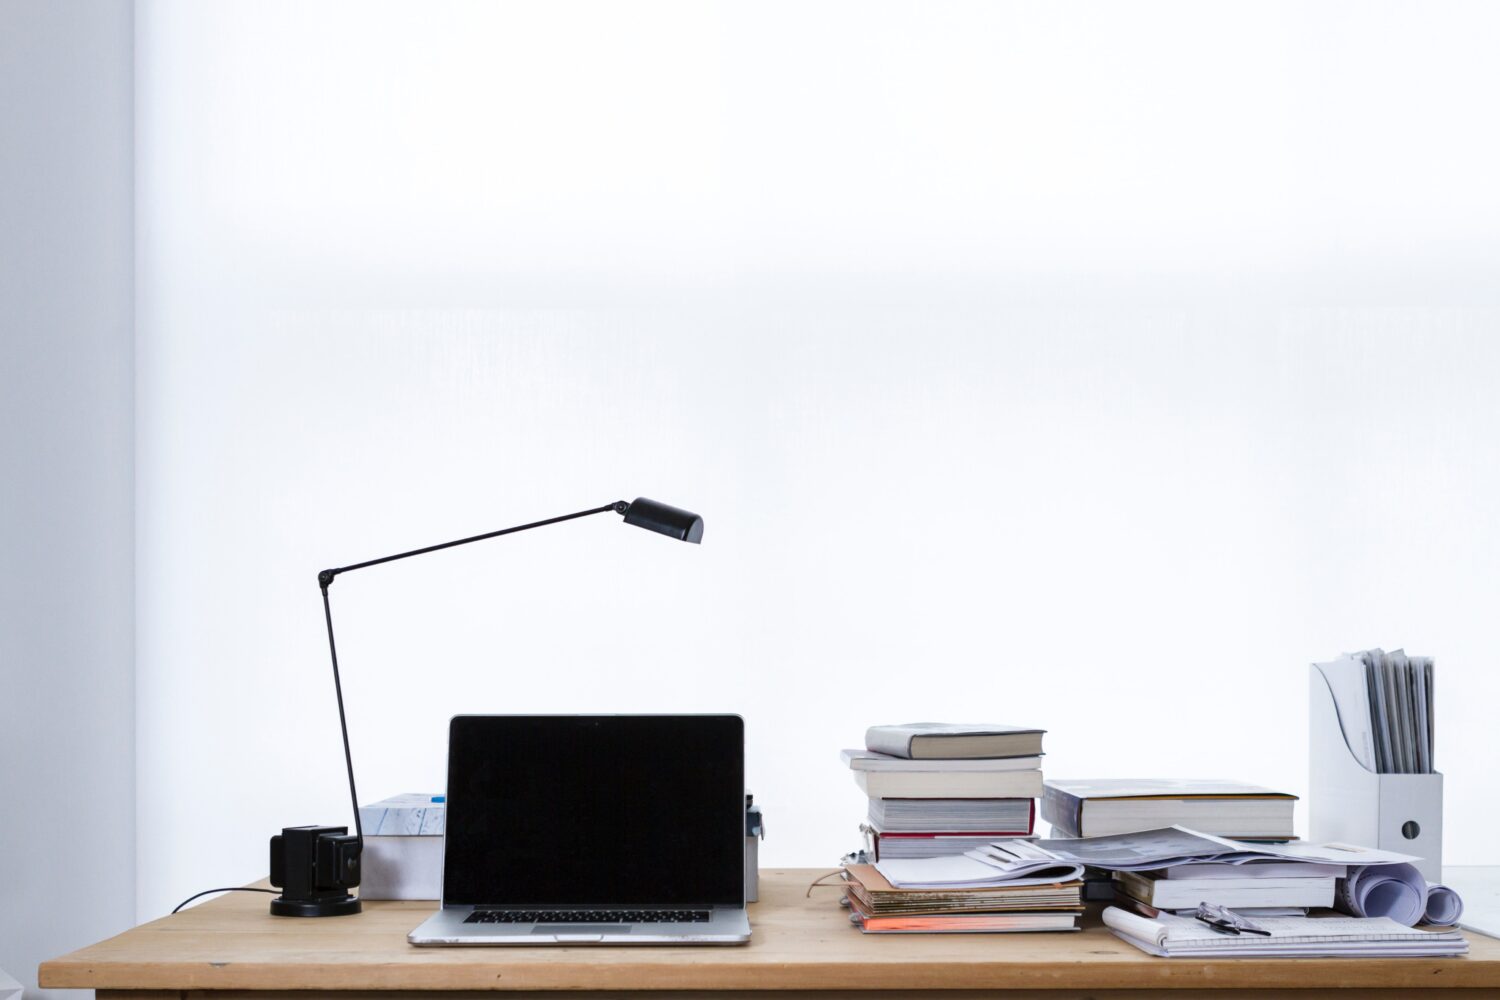 Laptop on wood desk with a lamp, stacks of books and folders in front of a white wall.